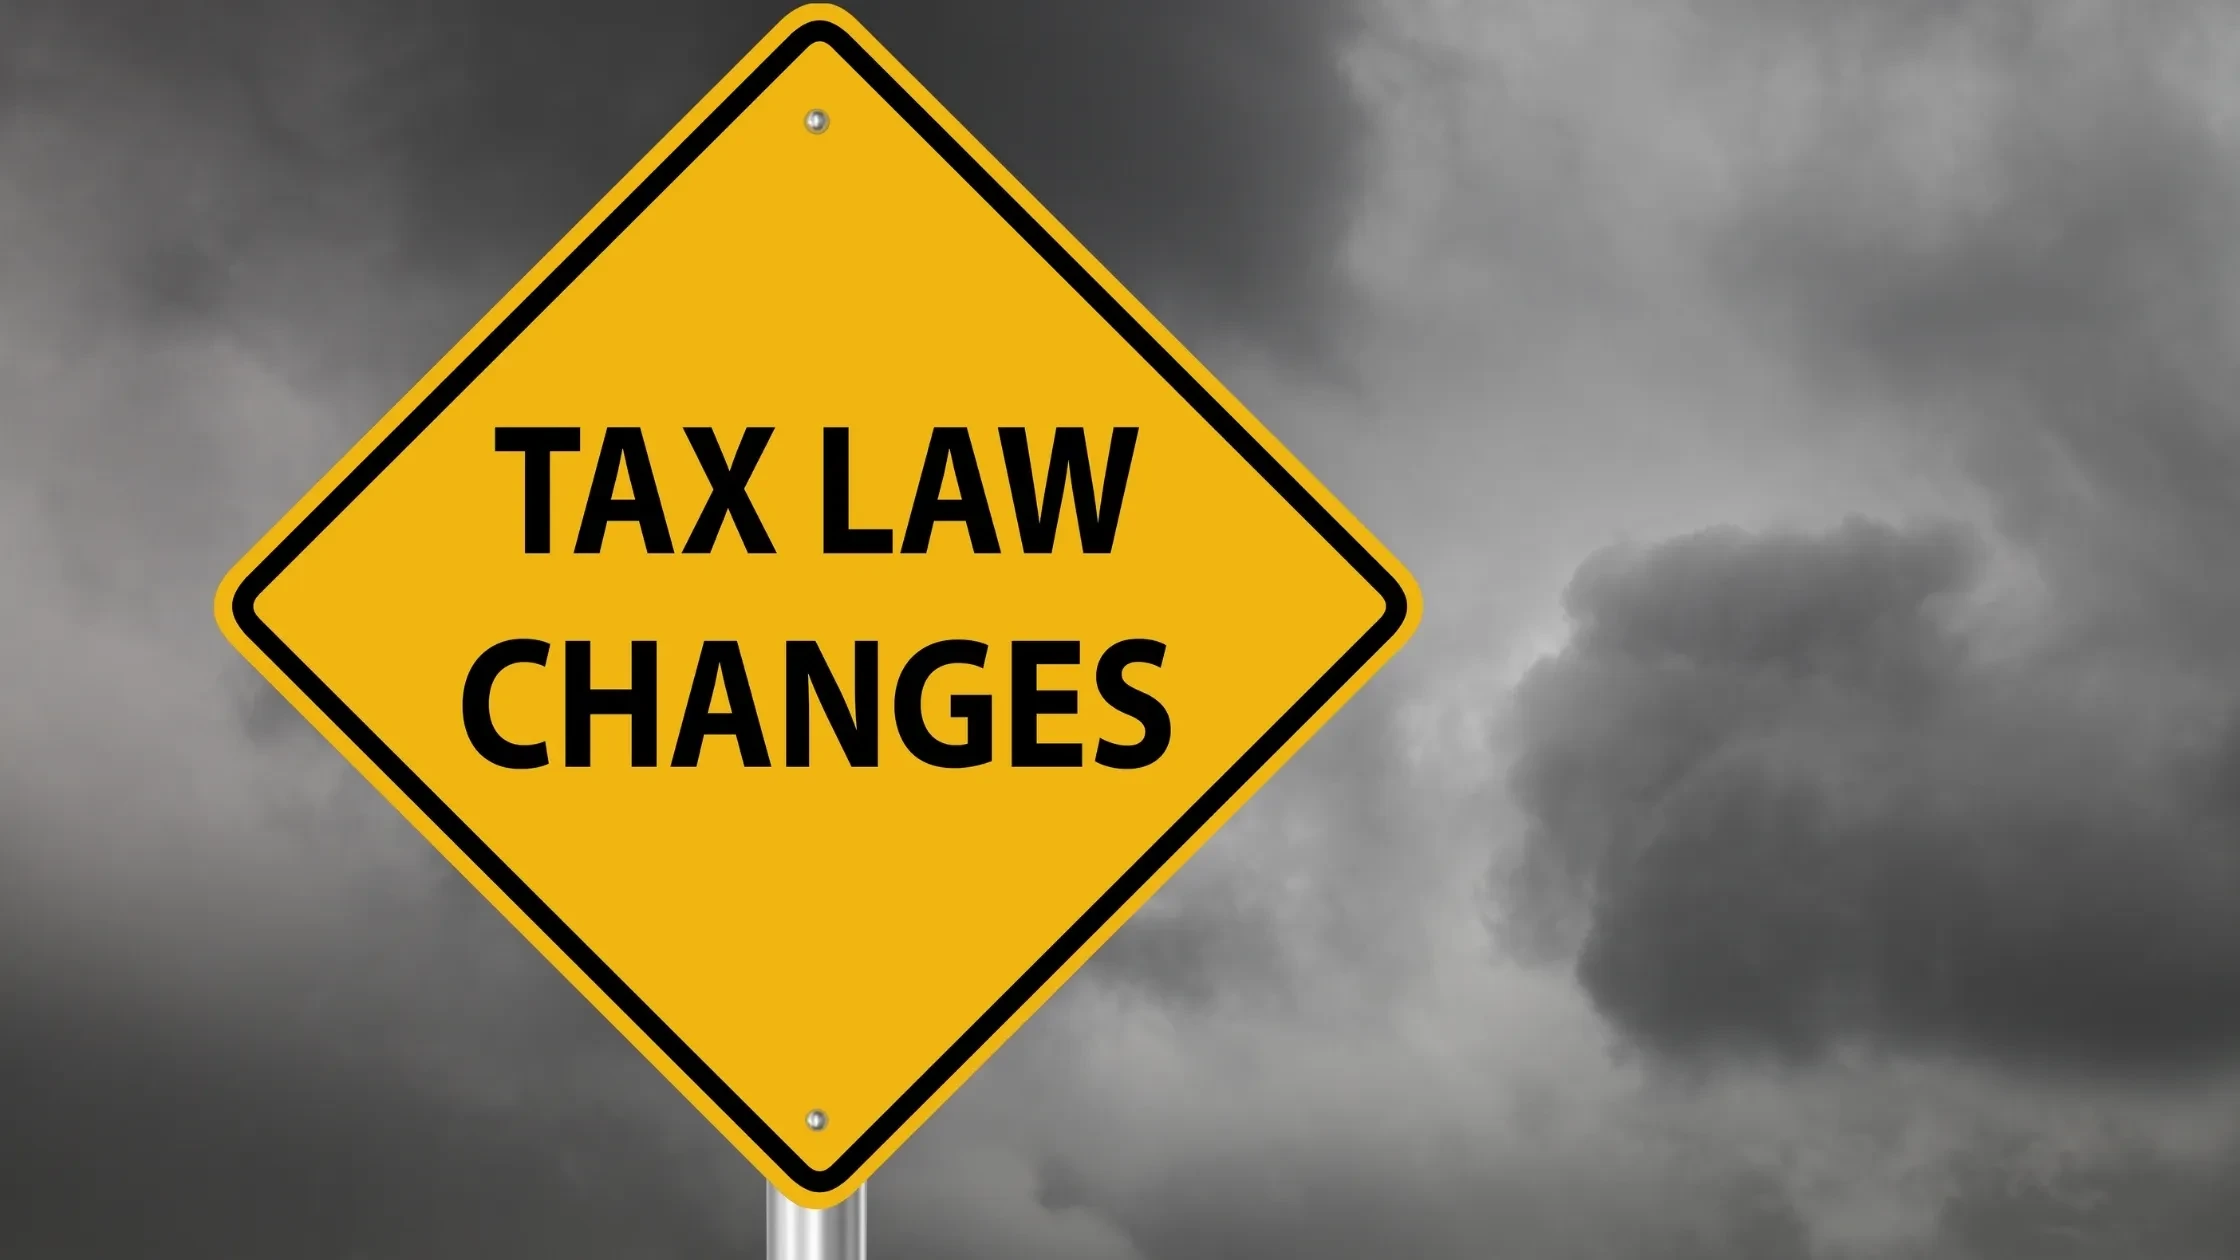 Is Your Business Ready For These Major Tax Changes In 2021?